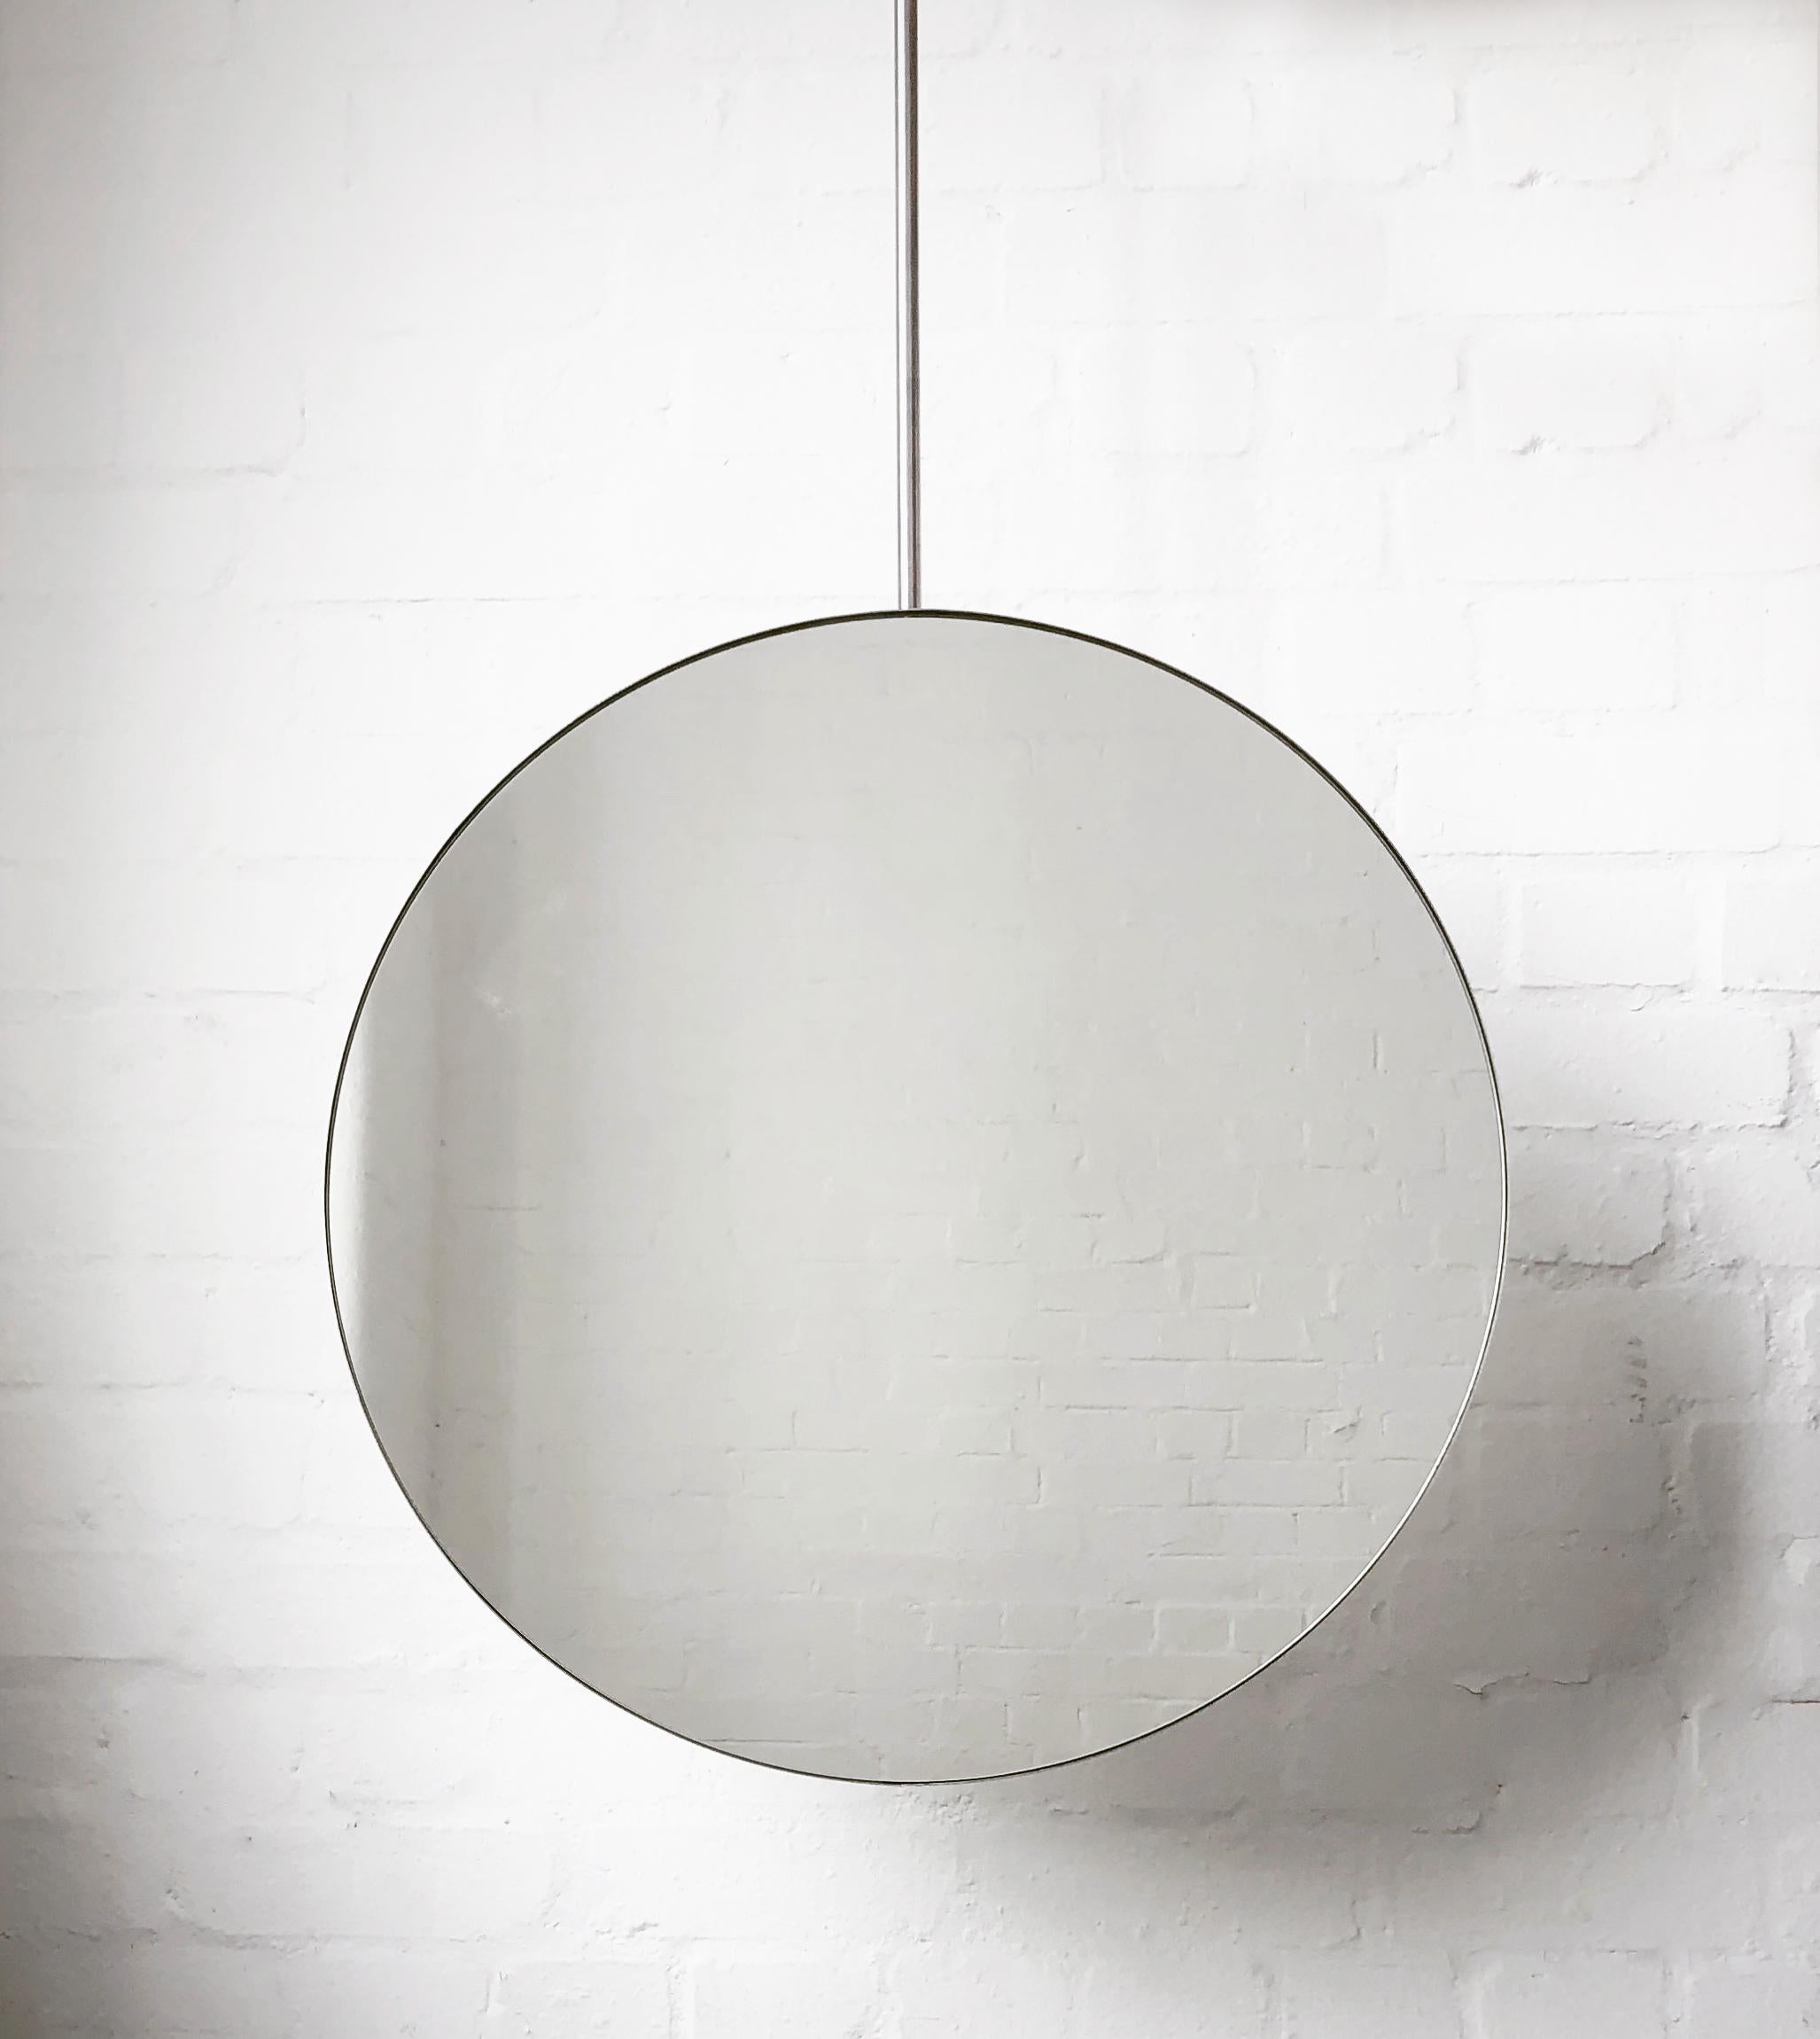 Splendid Art-Deco inspired ceiling suspended round mirror with a brushed stainless steel frame.

Measures: 550mm (21.65